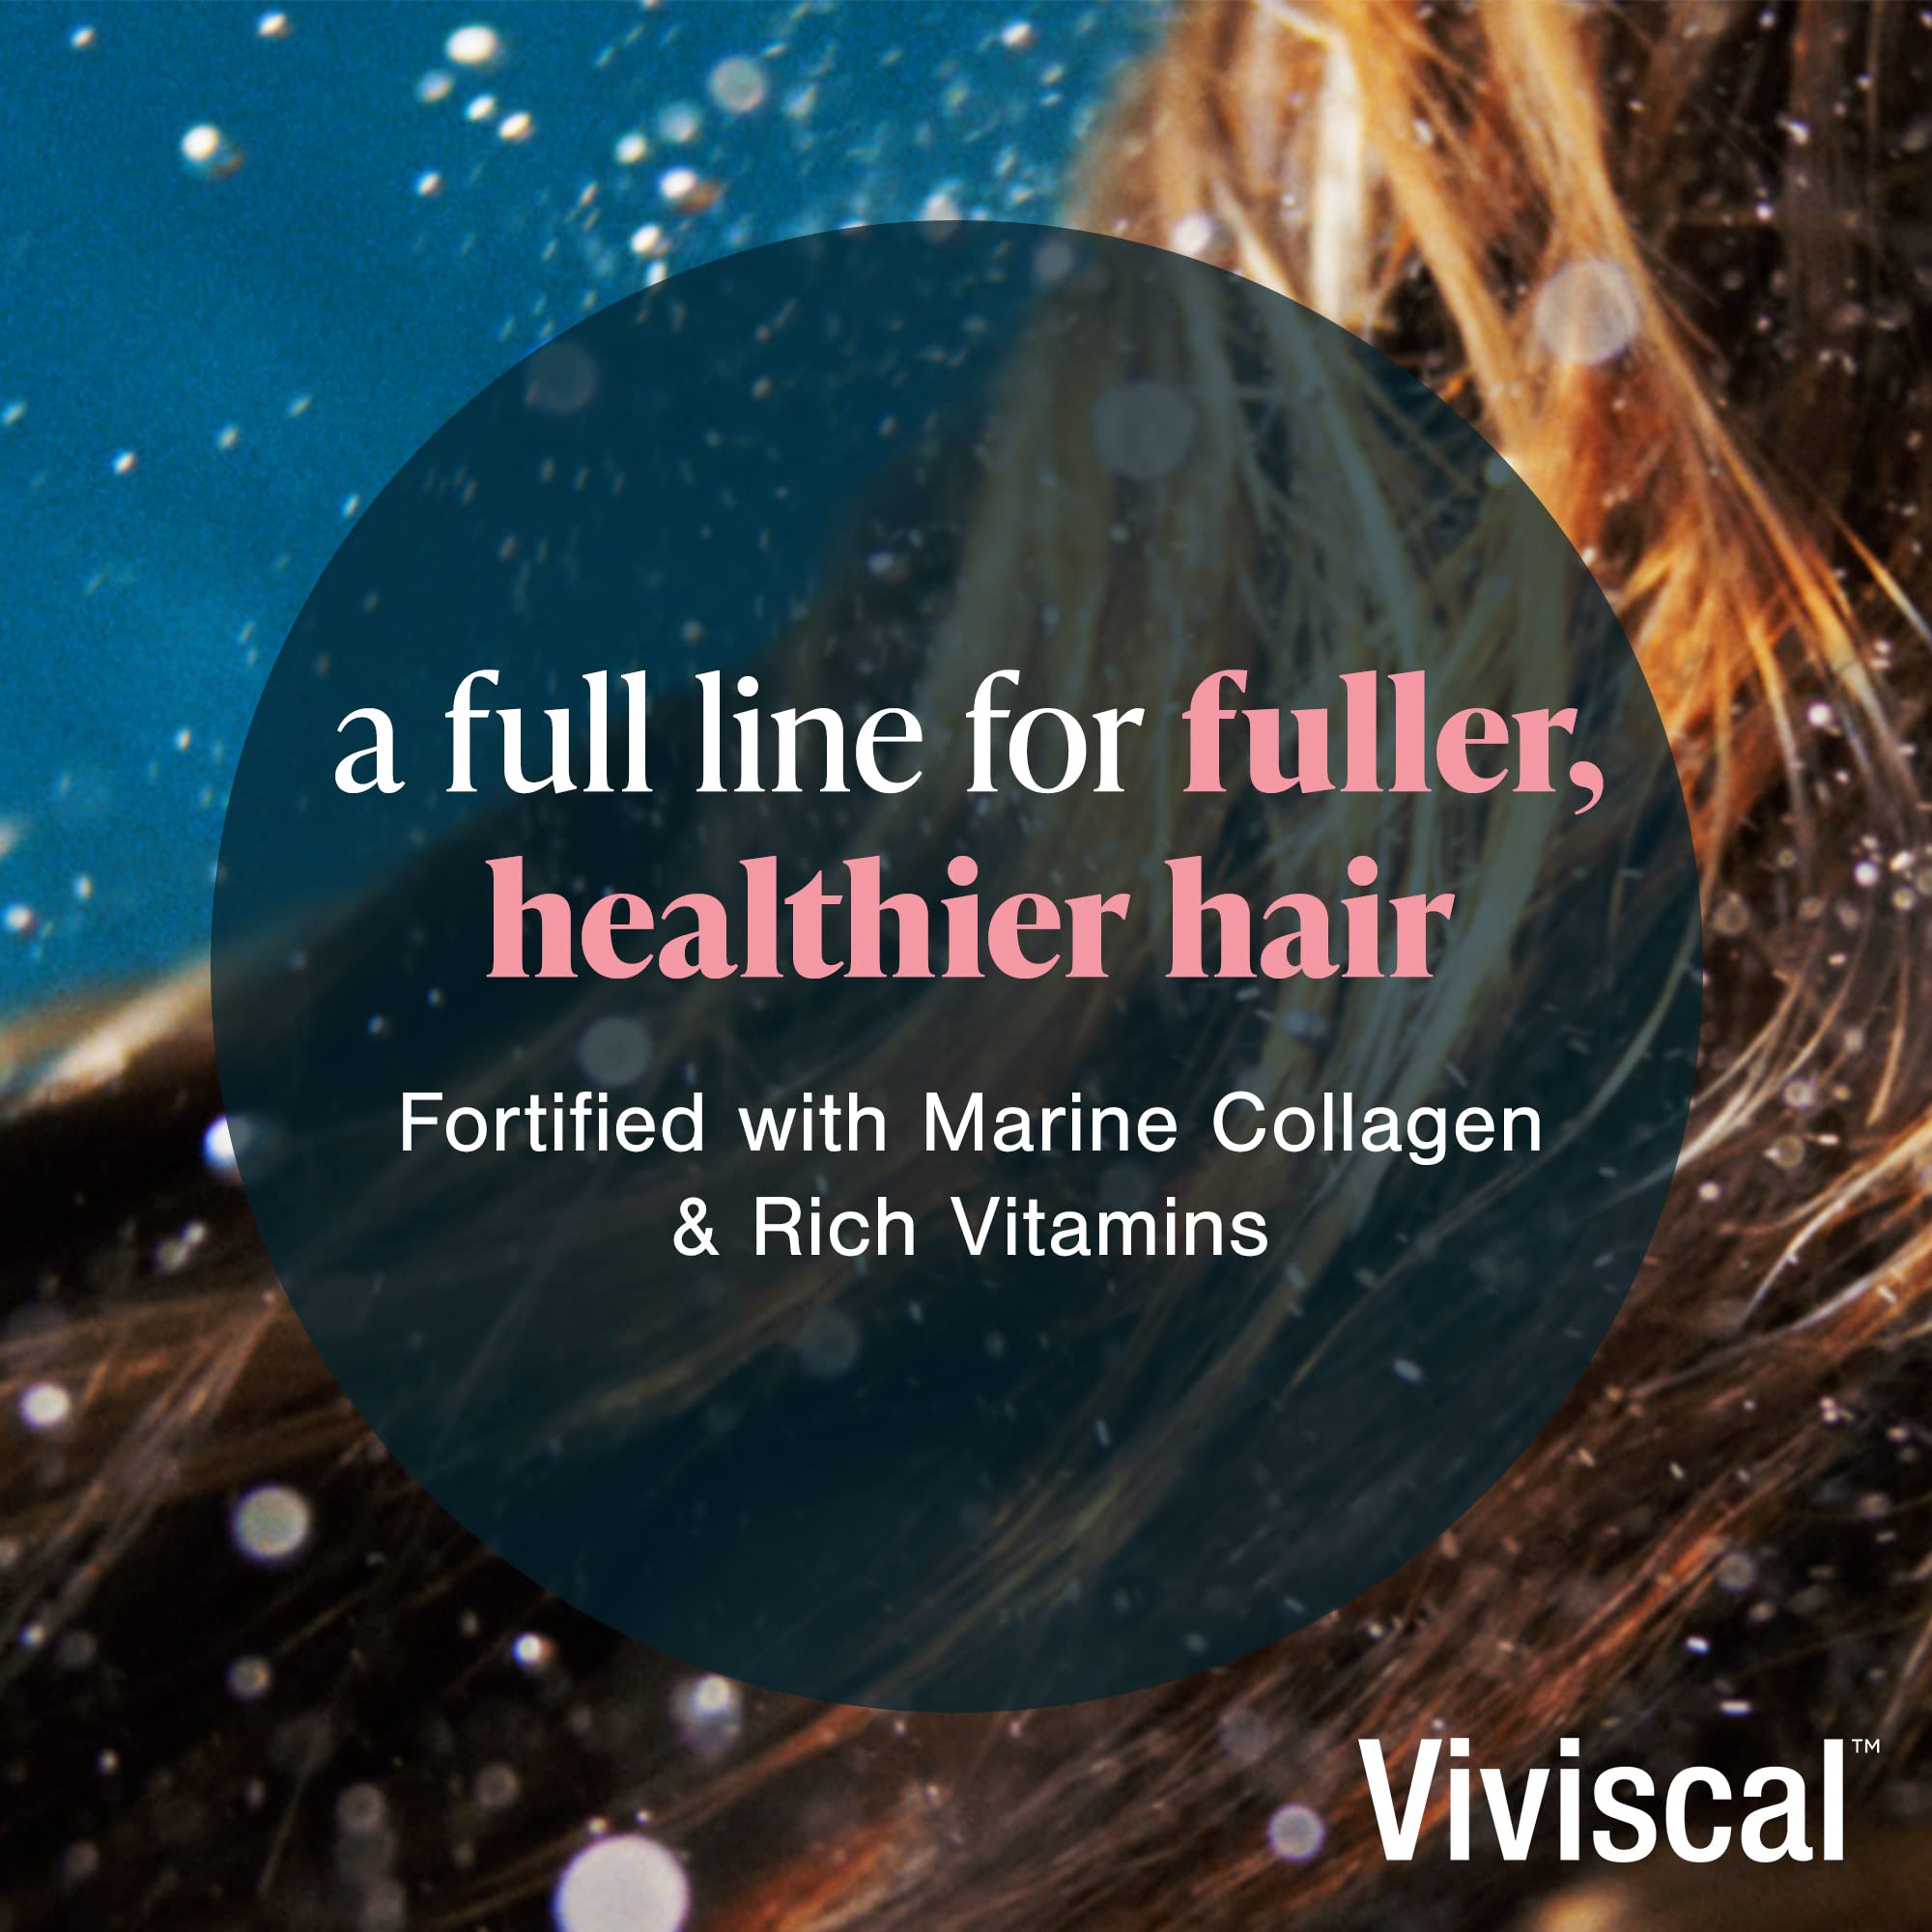 Viviscal Hair Thickening Conditioner, Moisturizing Formula Conditions & Strengthens, Biotin & Keratin, Marine Collagen & Seaweed Extract, Hydrating, Healthier Looking Hair, 250ml (8.45 Fl. Oz.)